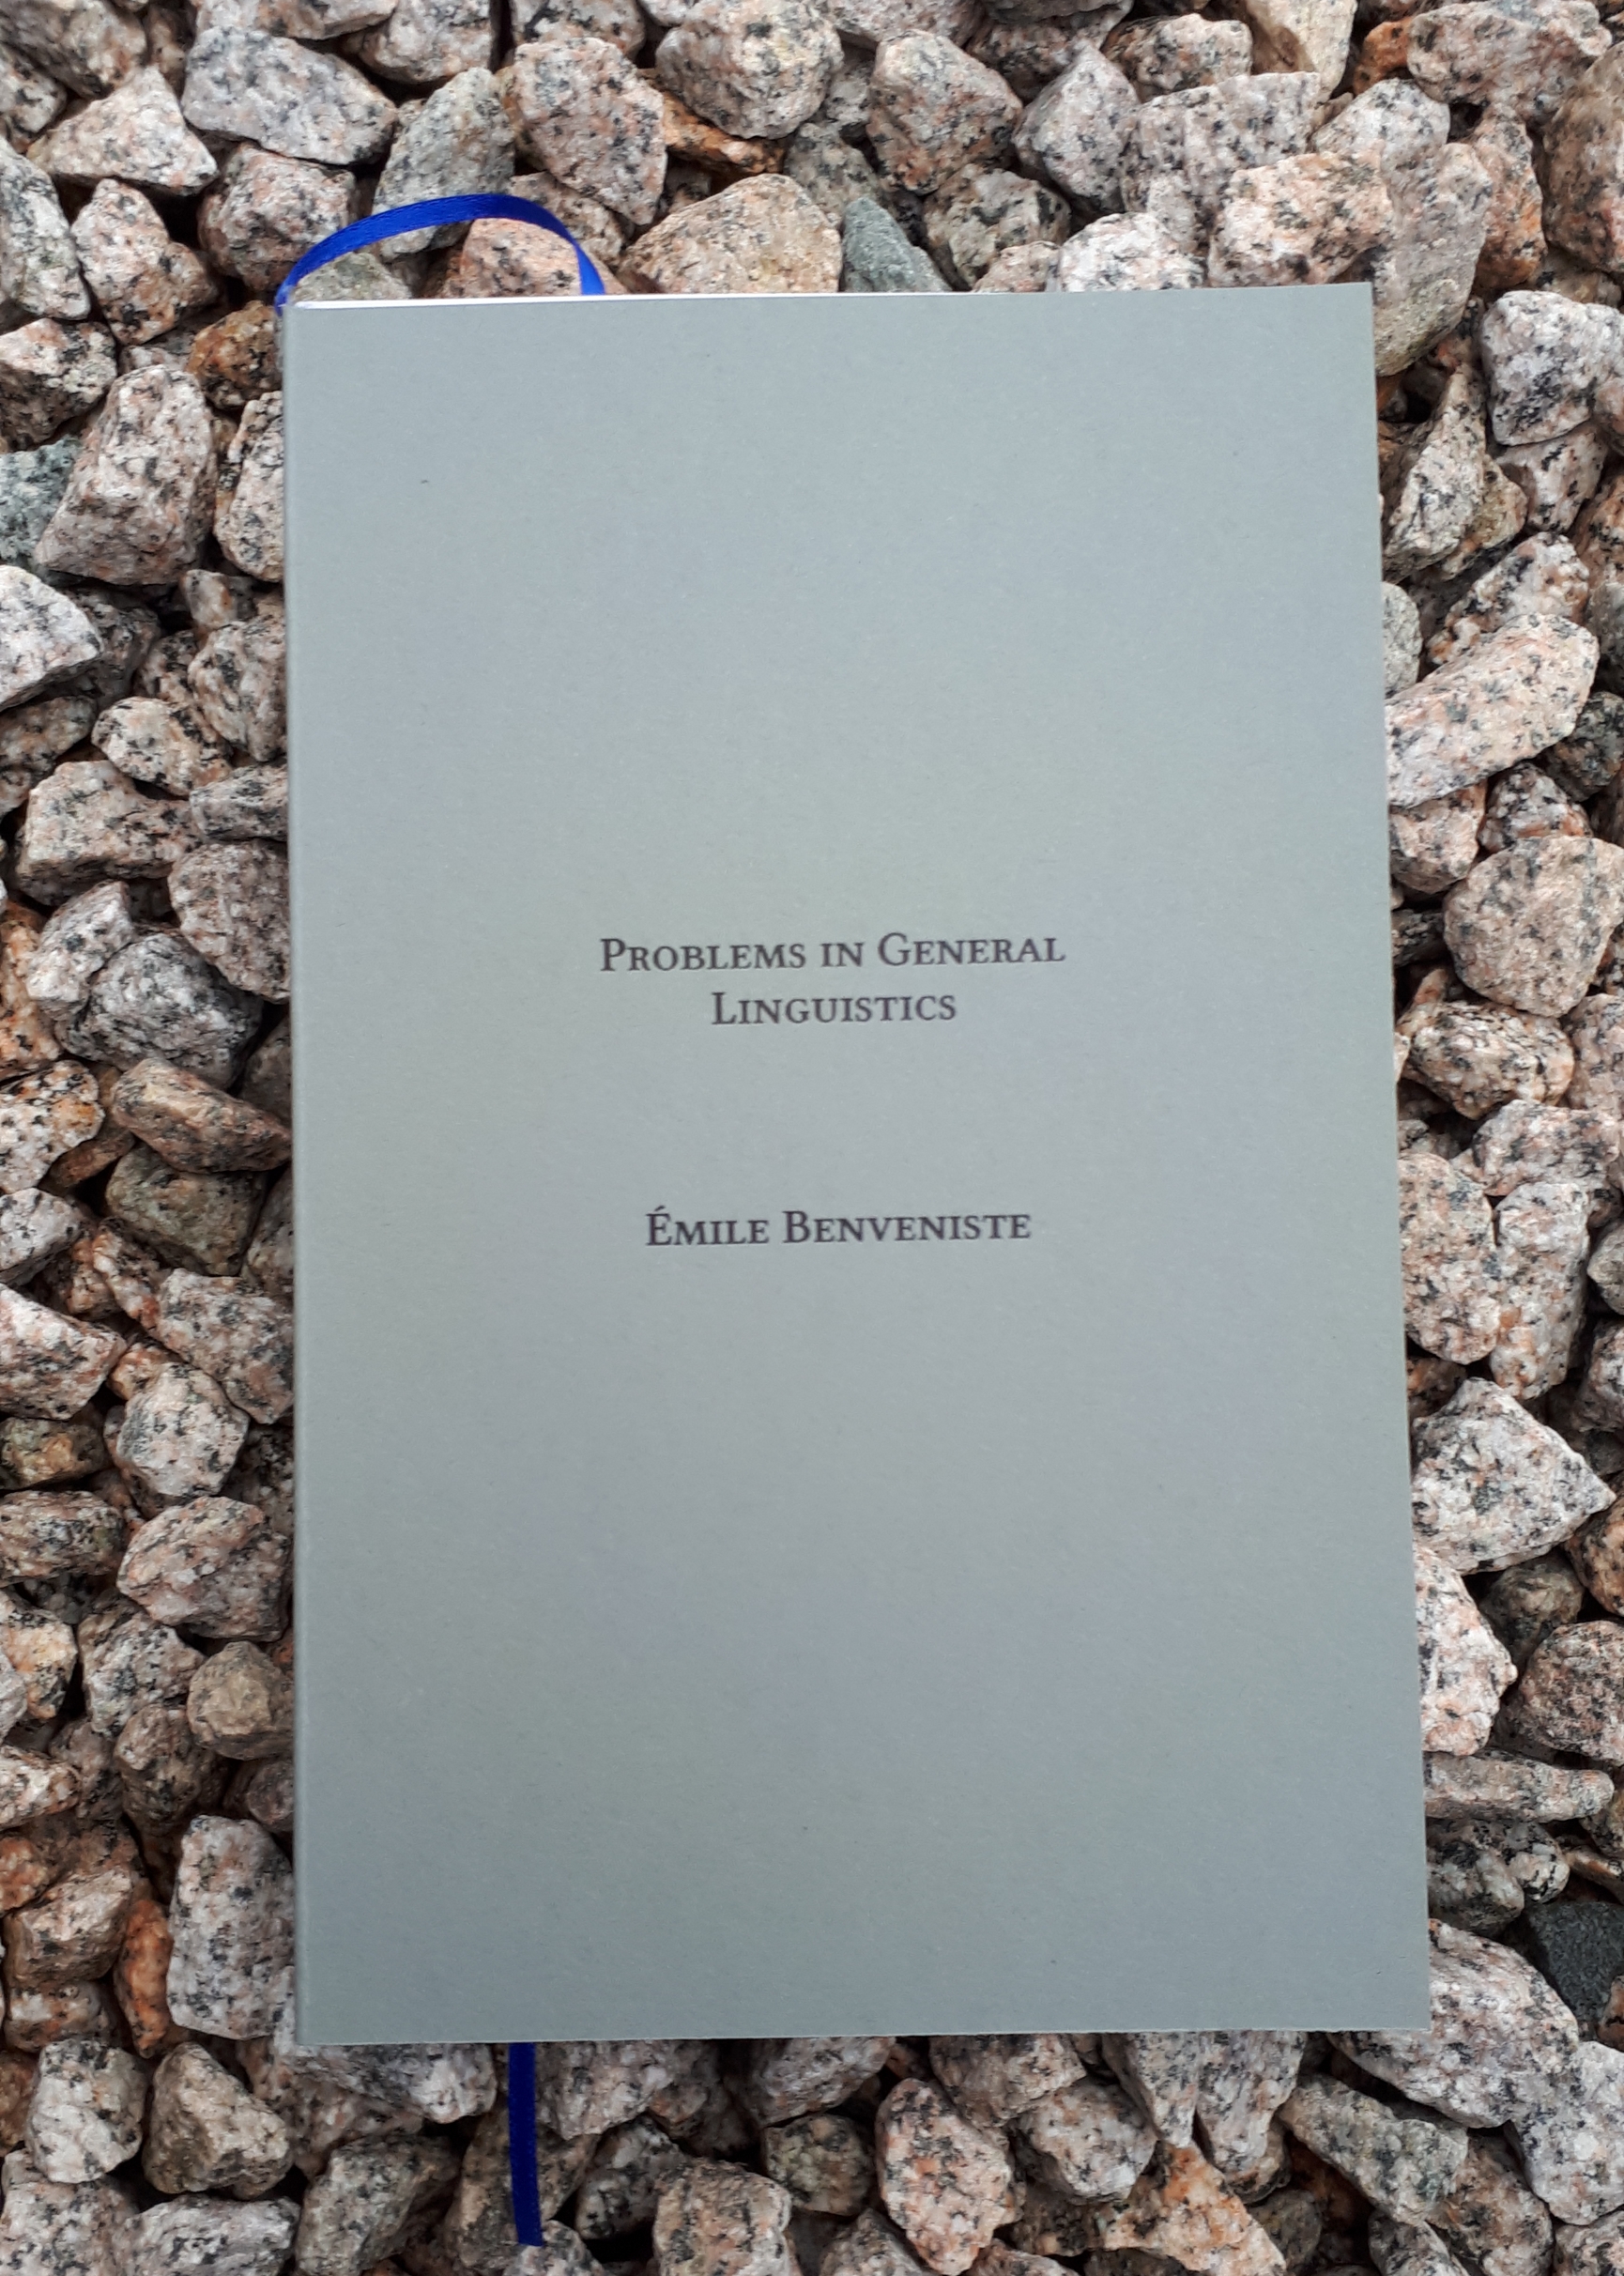 A book with a slate gray cover and blue marker ribbon lies on a bed of sharp gravel. Text on the cover reads "Problems in General Linguistics, Emile Benveniste"